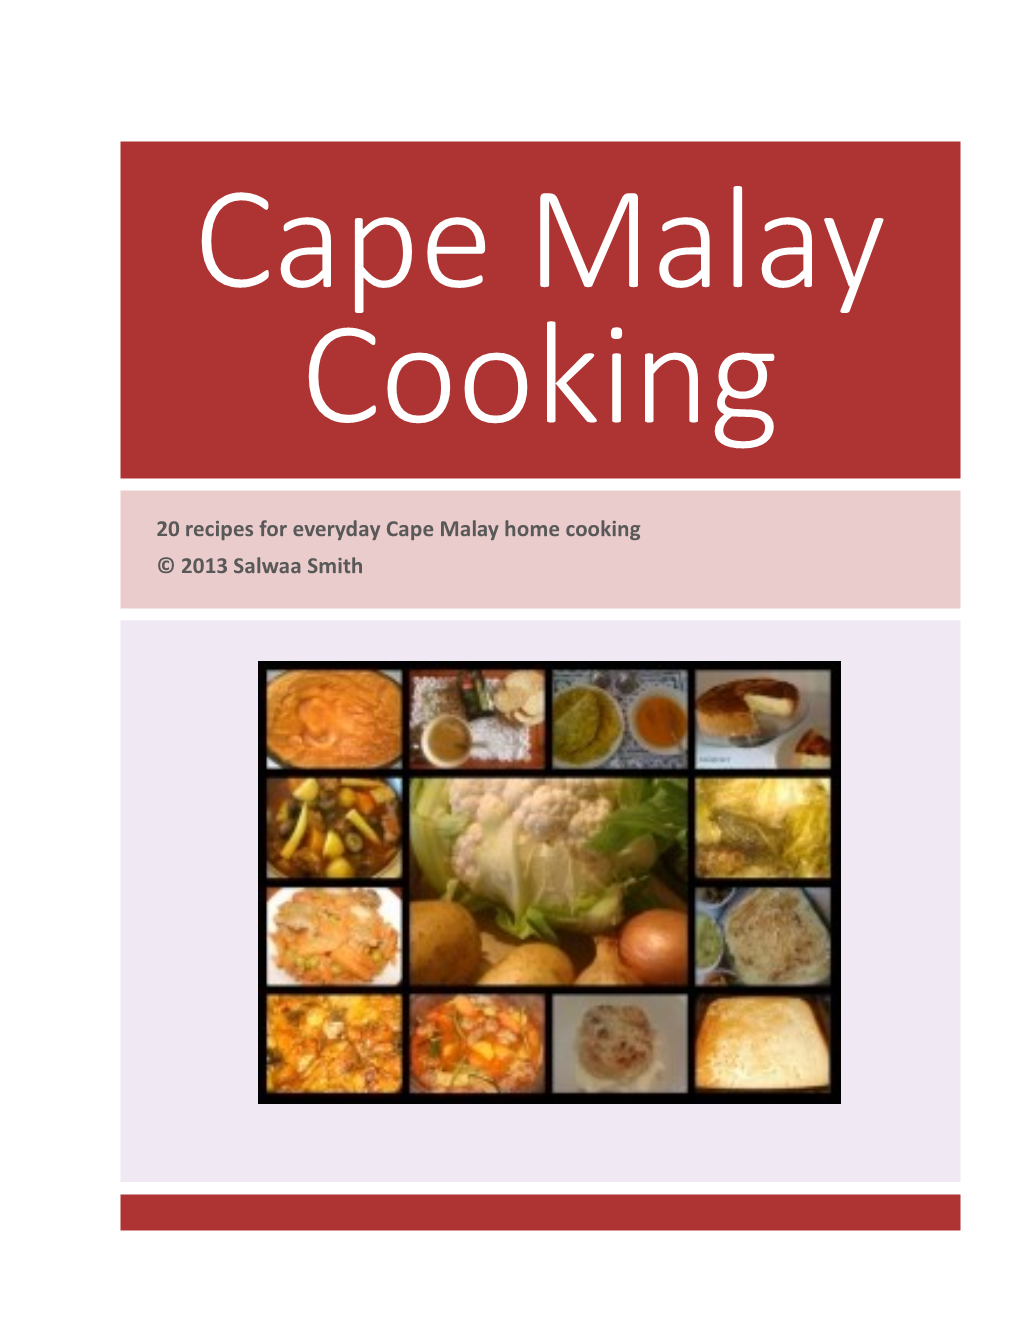 20 Recipes for Everyday Cape Malay Home Cooking © 2013 Salwaa Smith